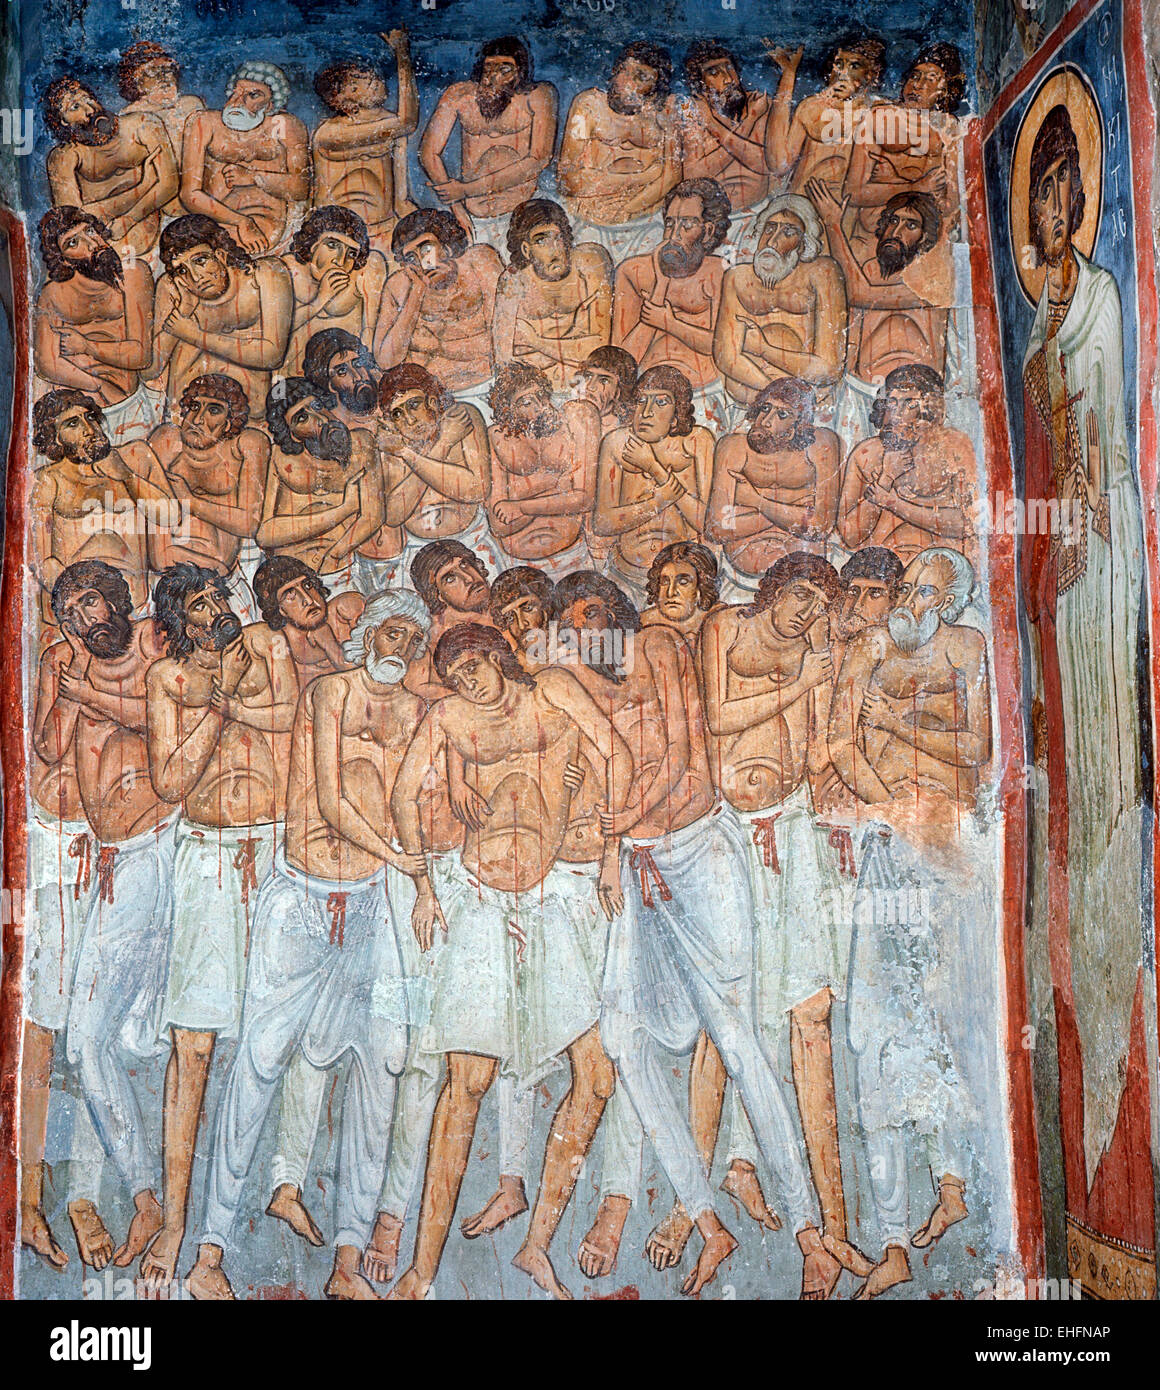 The Forty Martyrs of Sebaste, a mural in the Church of Panagia Phorbiotissa at Asinou Cyprus 1105-6 AD Stock Photo